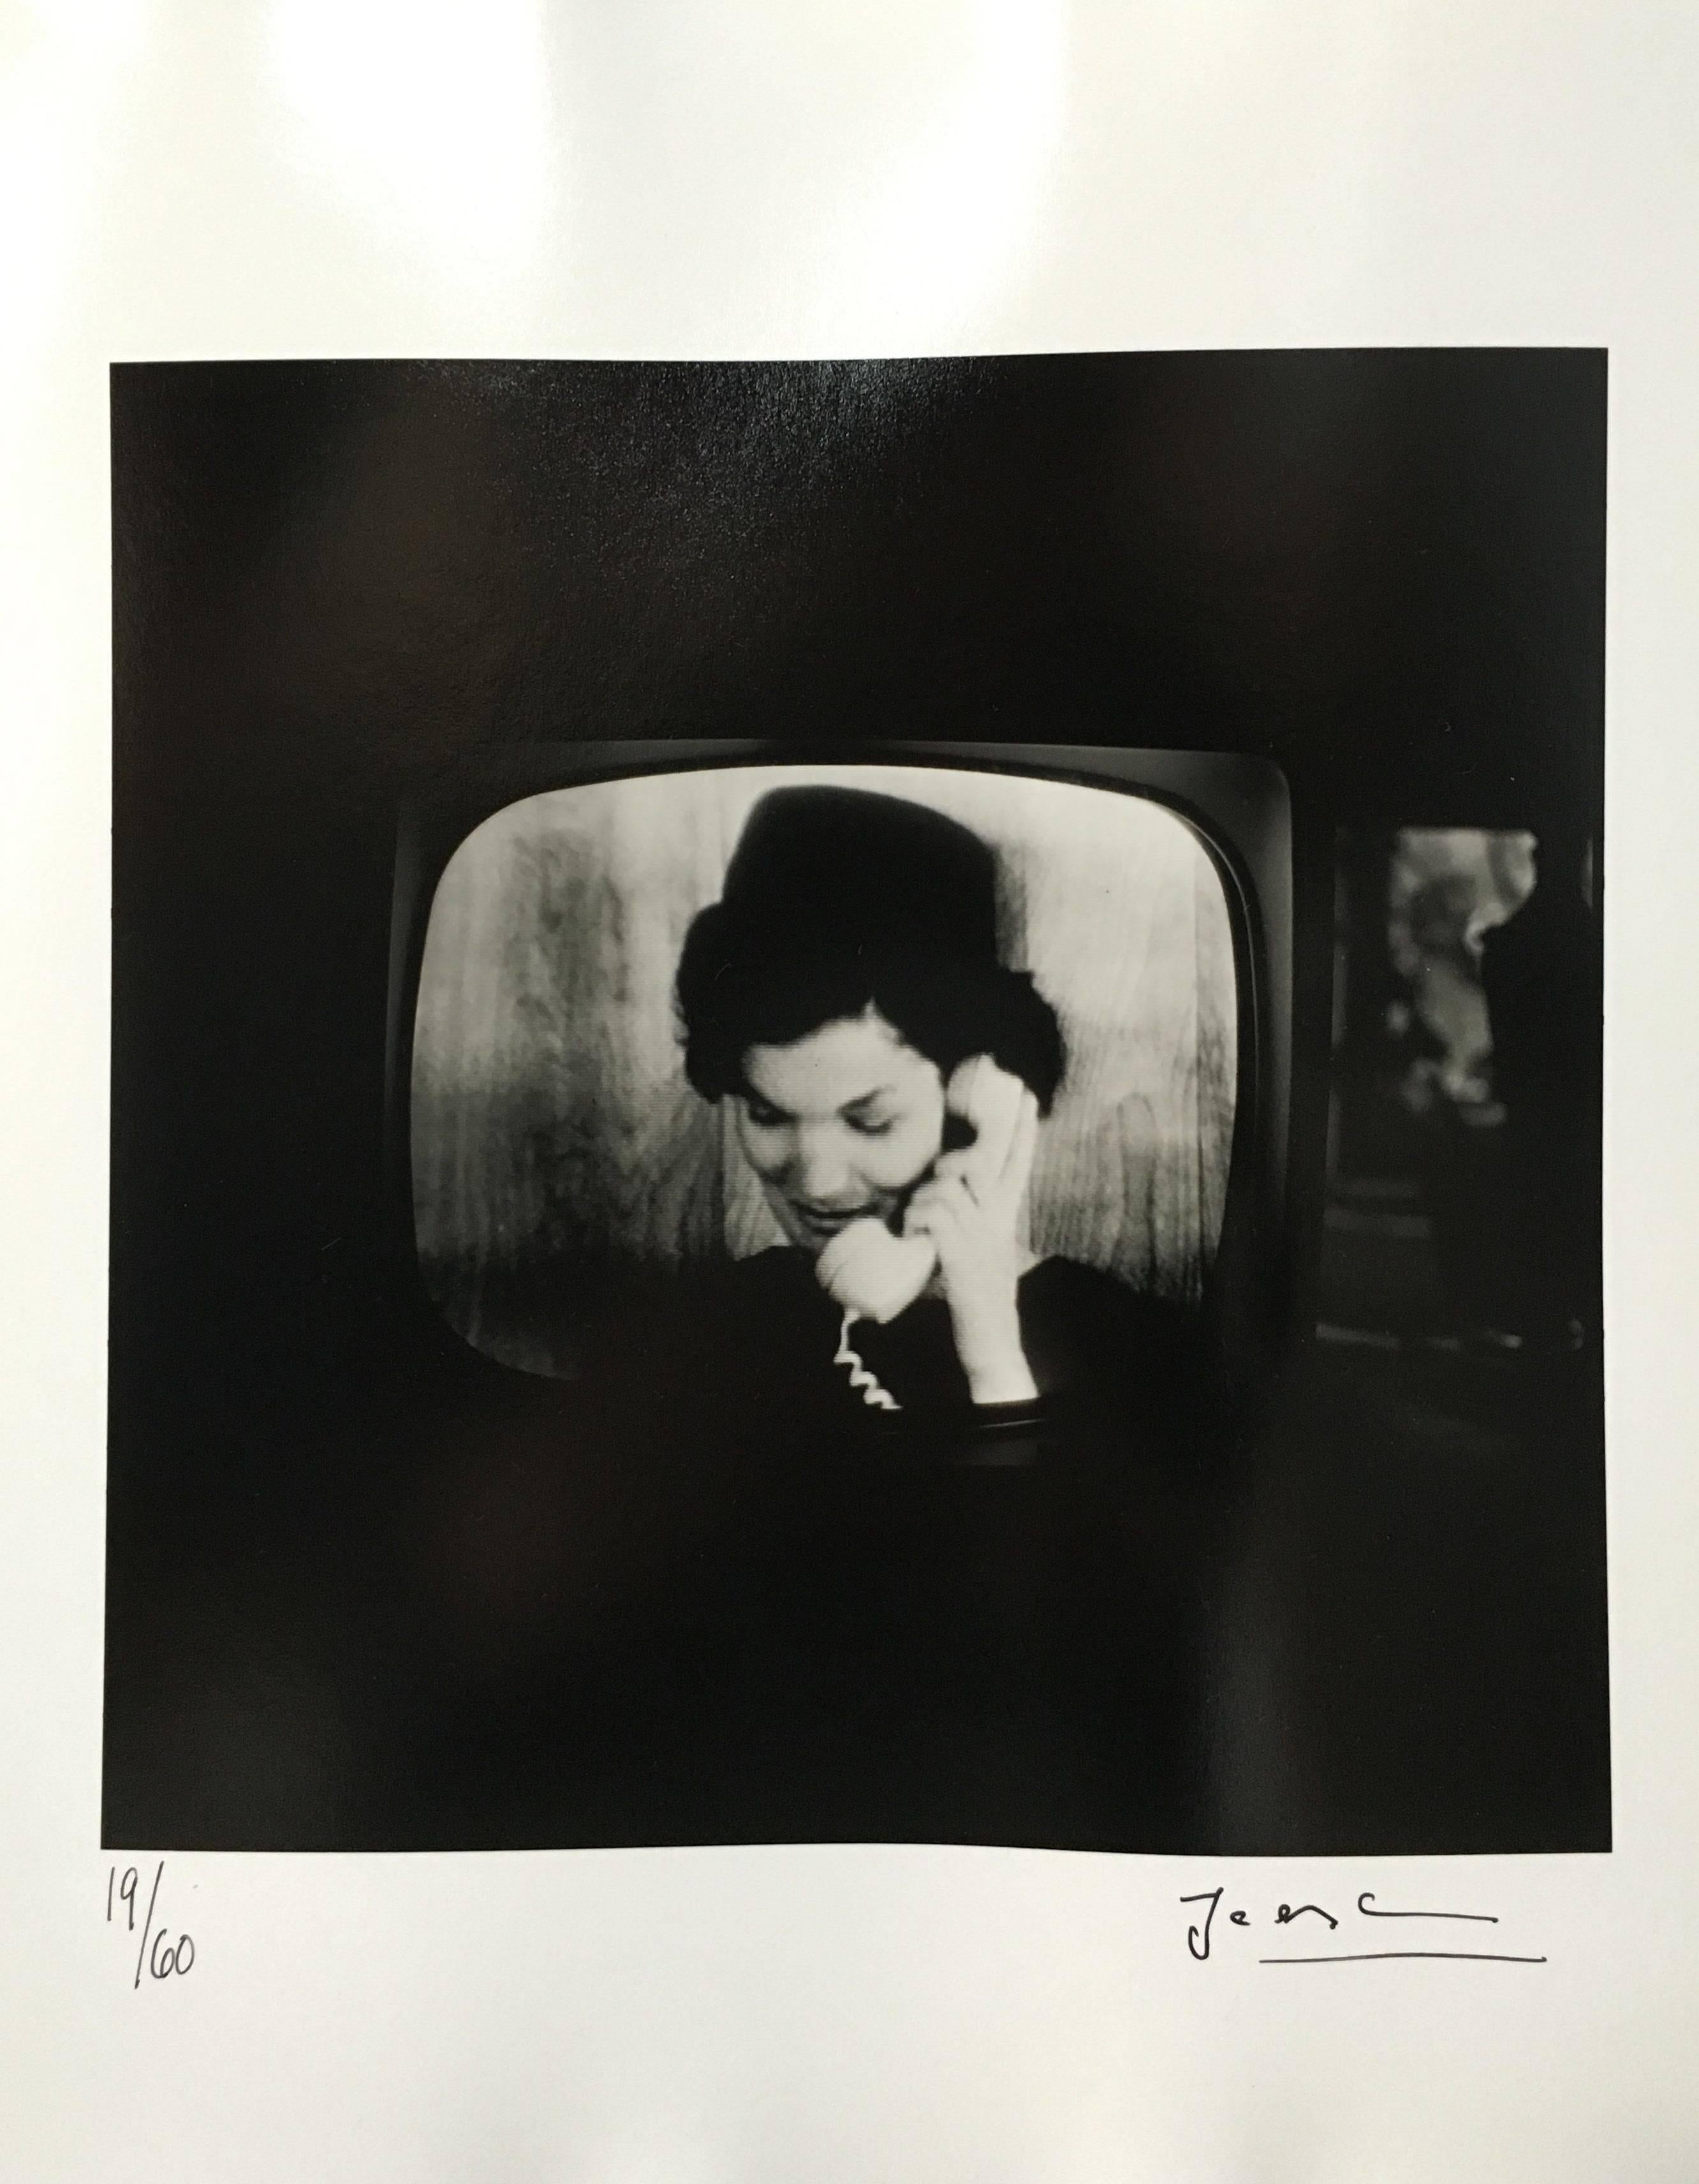 Jackie Campaigning, Television Commercial - Photograph by Jacques Lowe